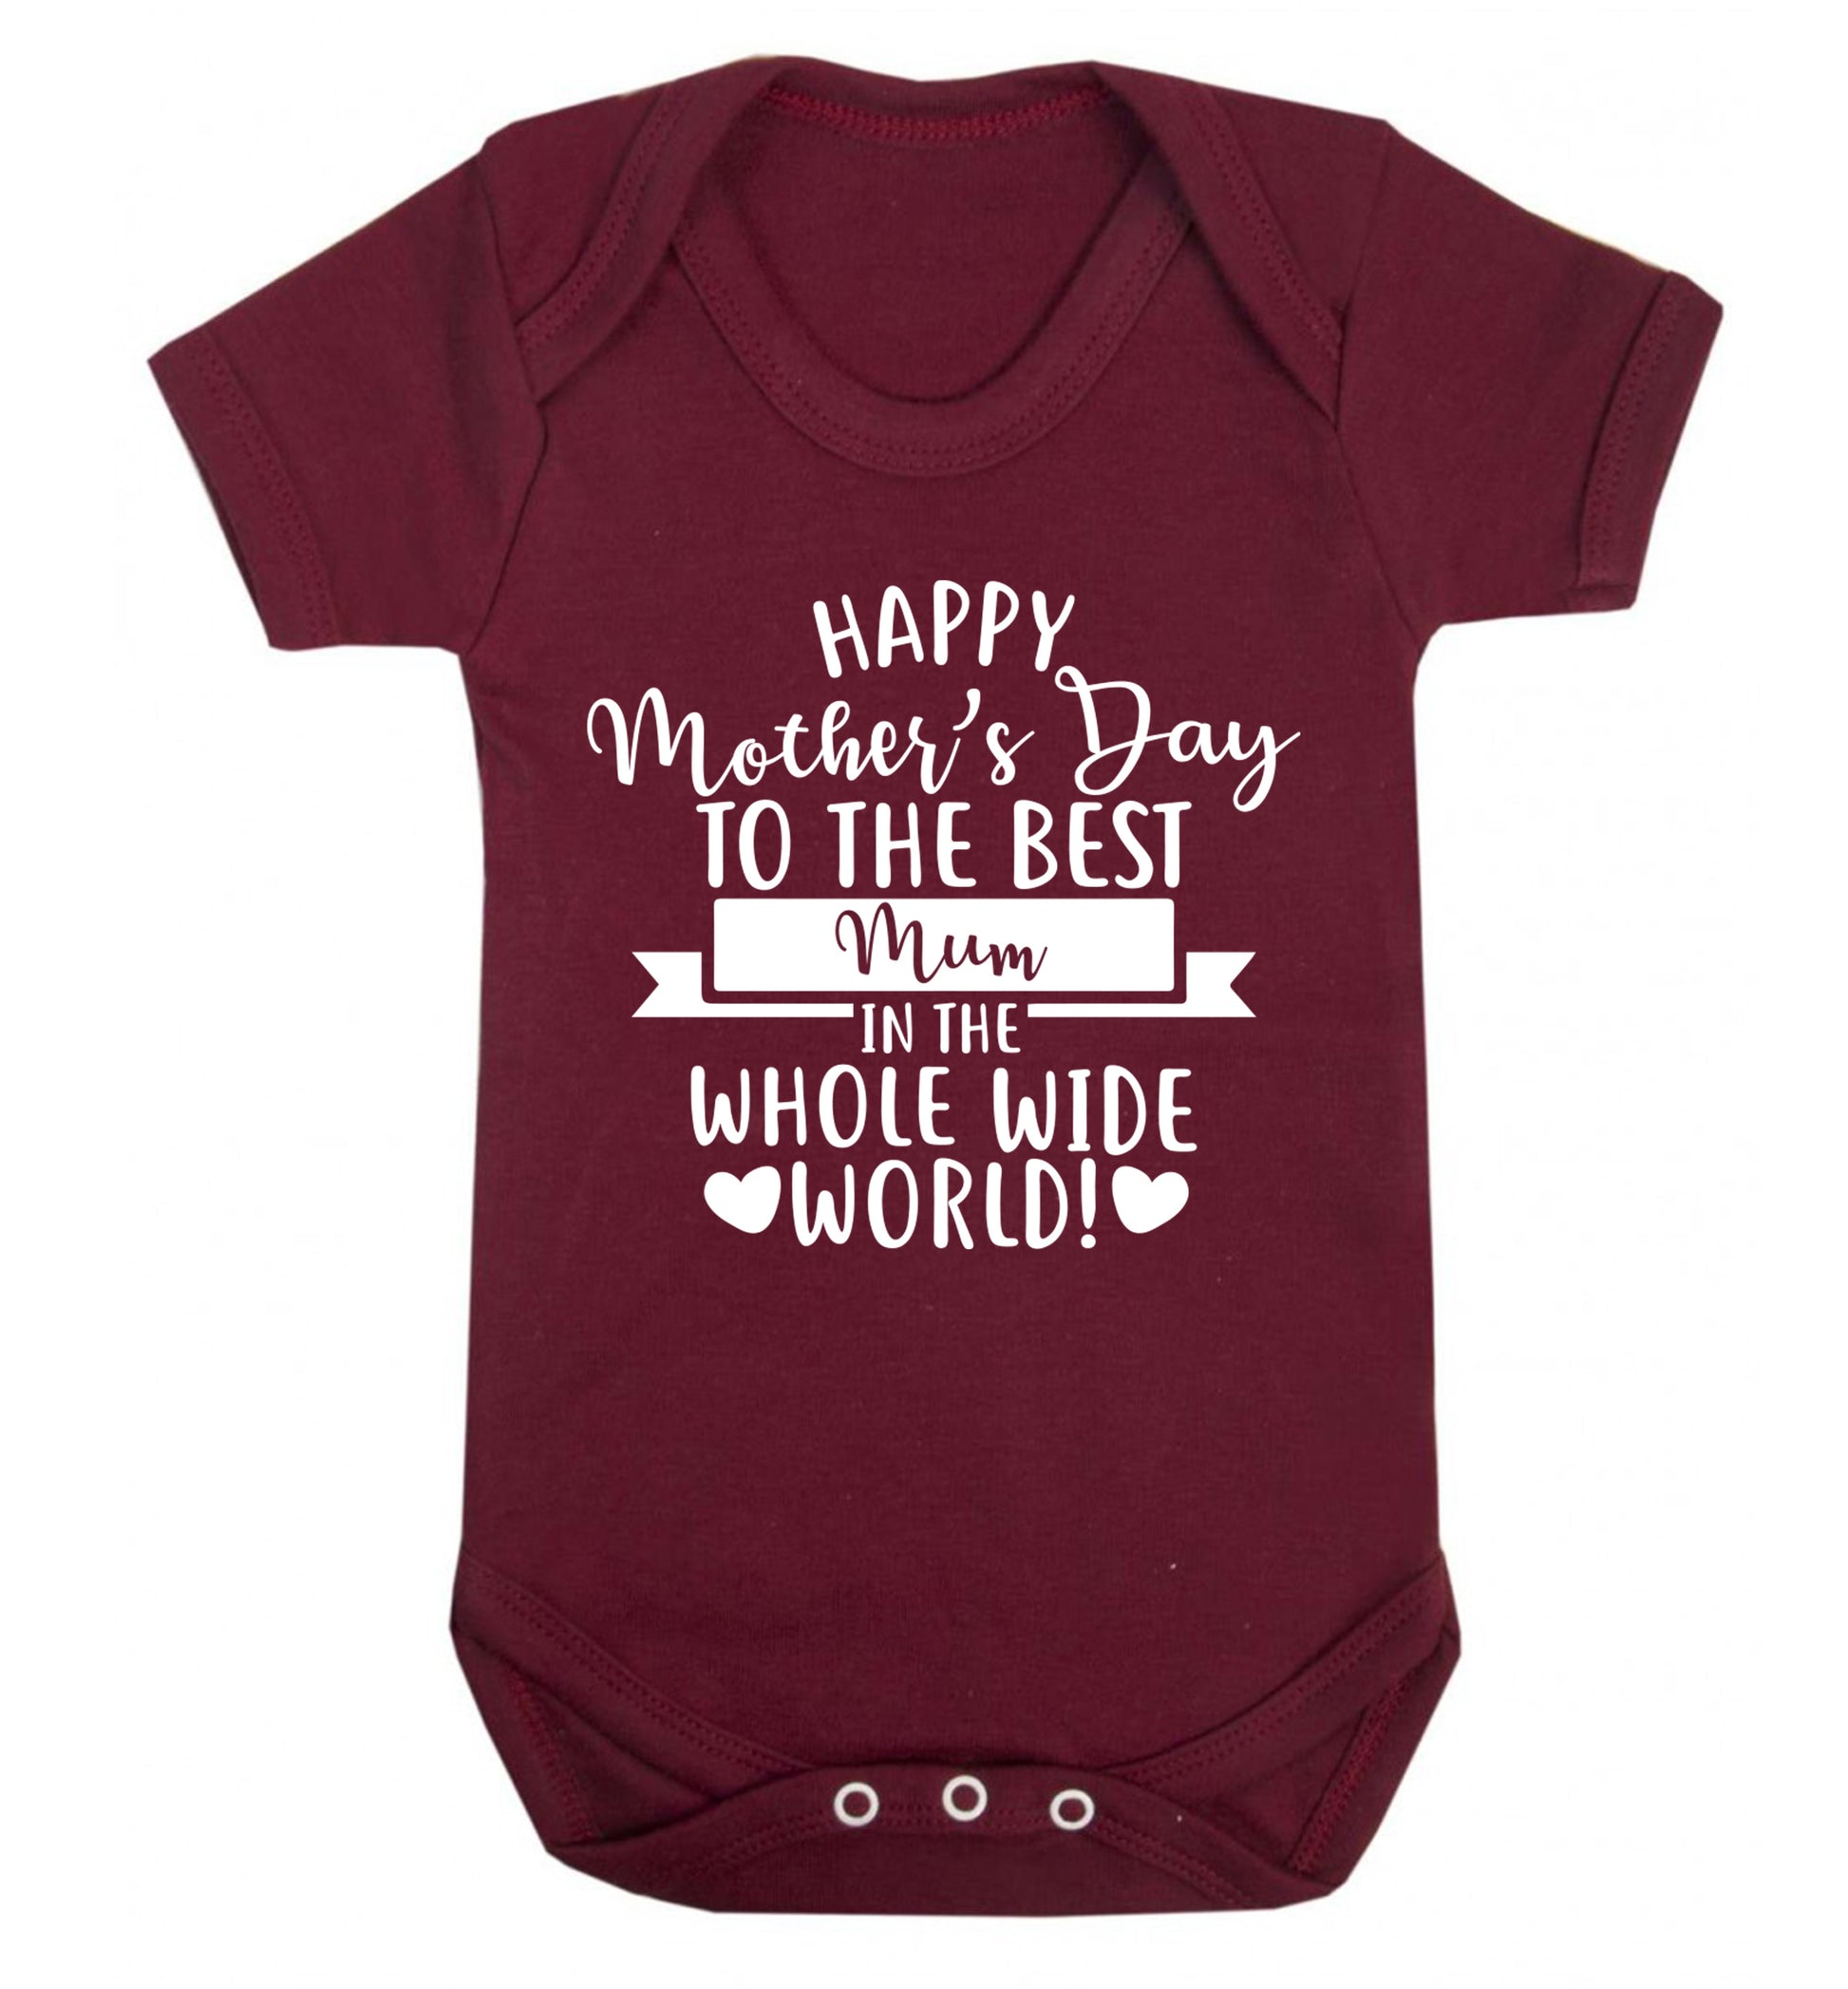 Happy Mother's Day to the best mum in the whole wide world! Baby Vest maroon 18-24 months